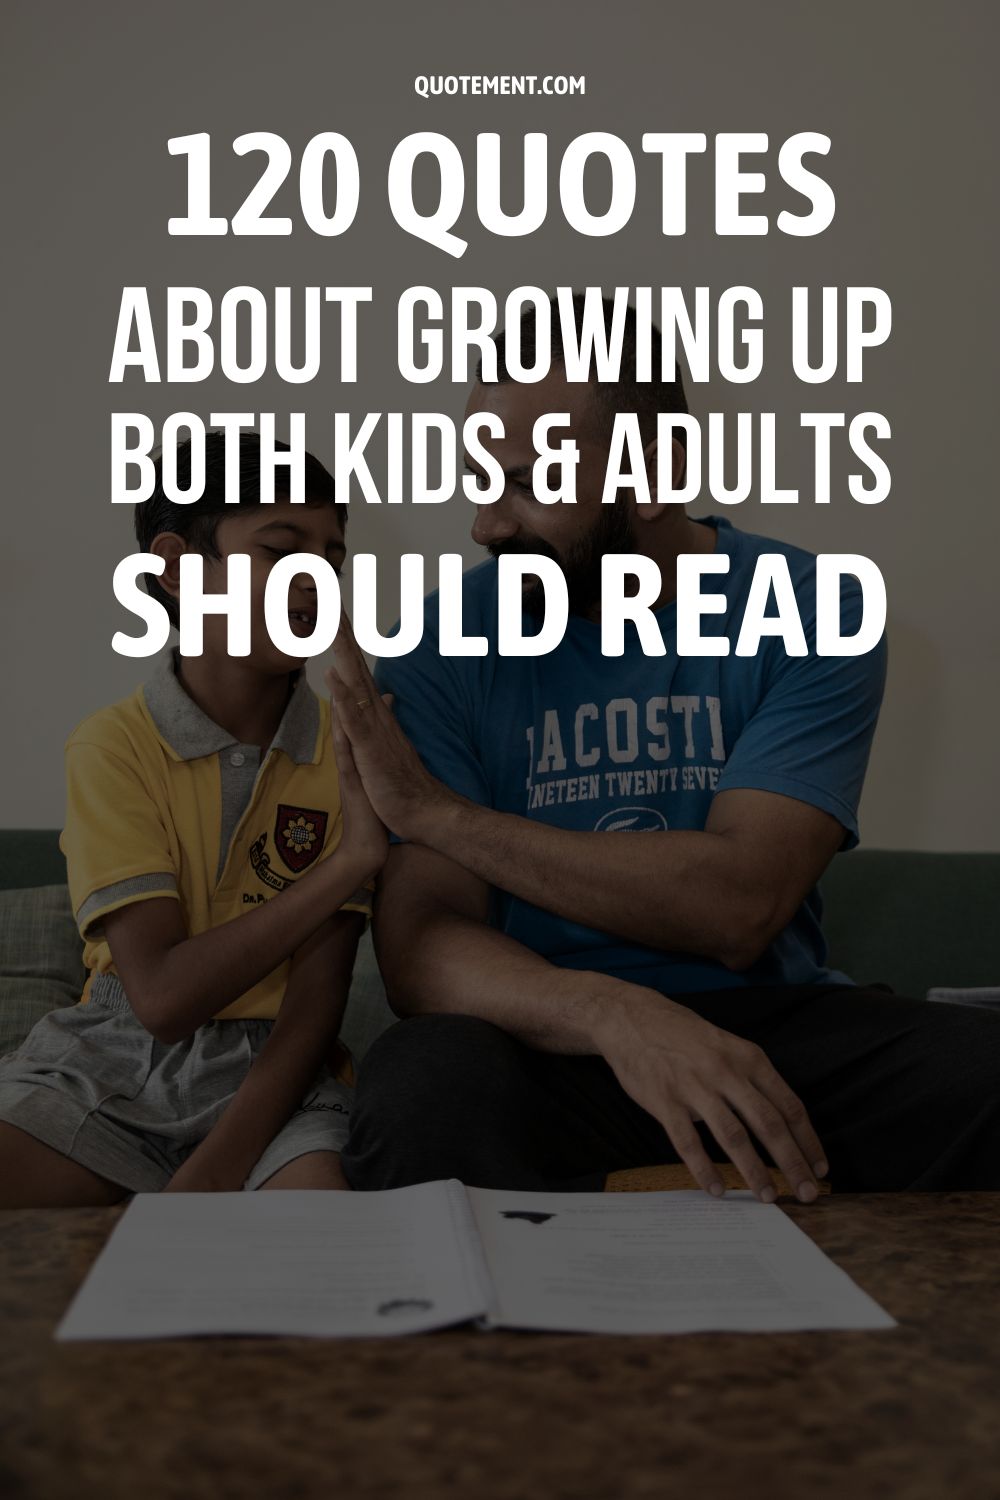 120 Quotes About Growing Up Both Kids & Adults Should Read
